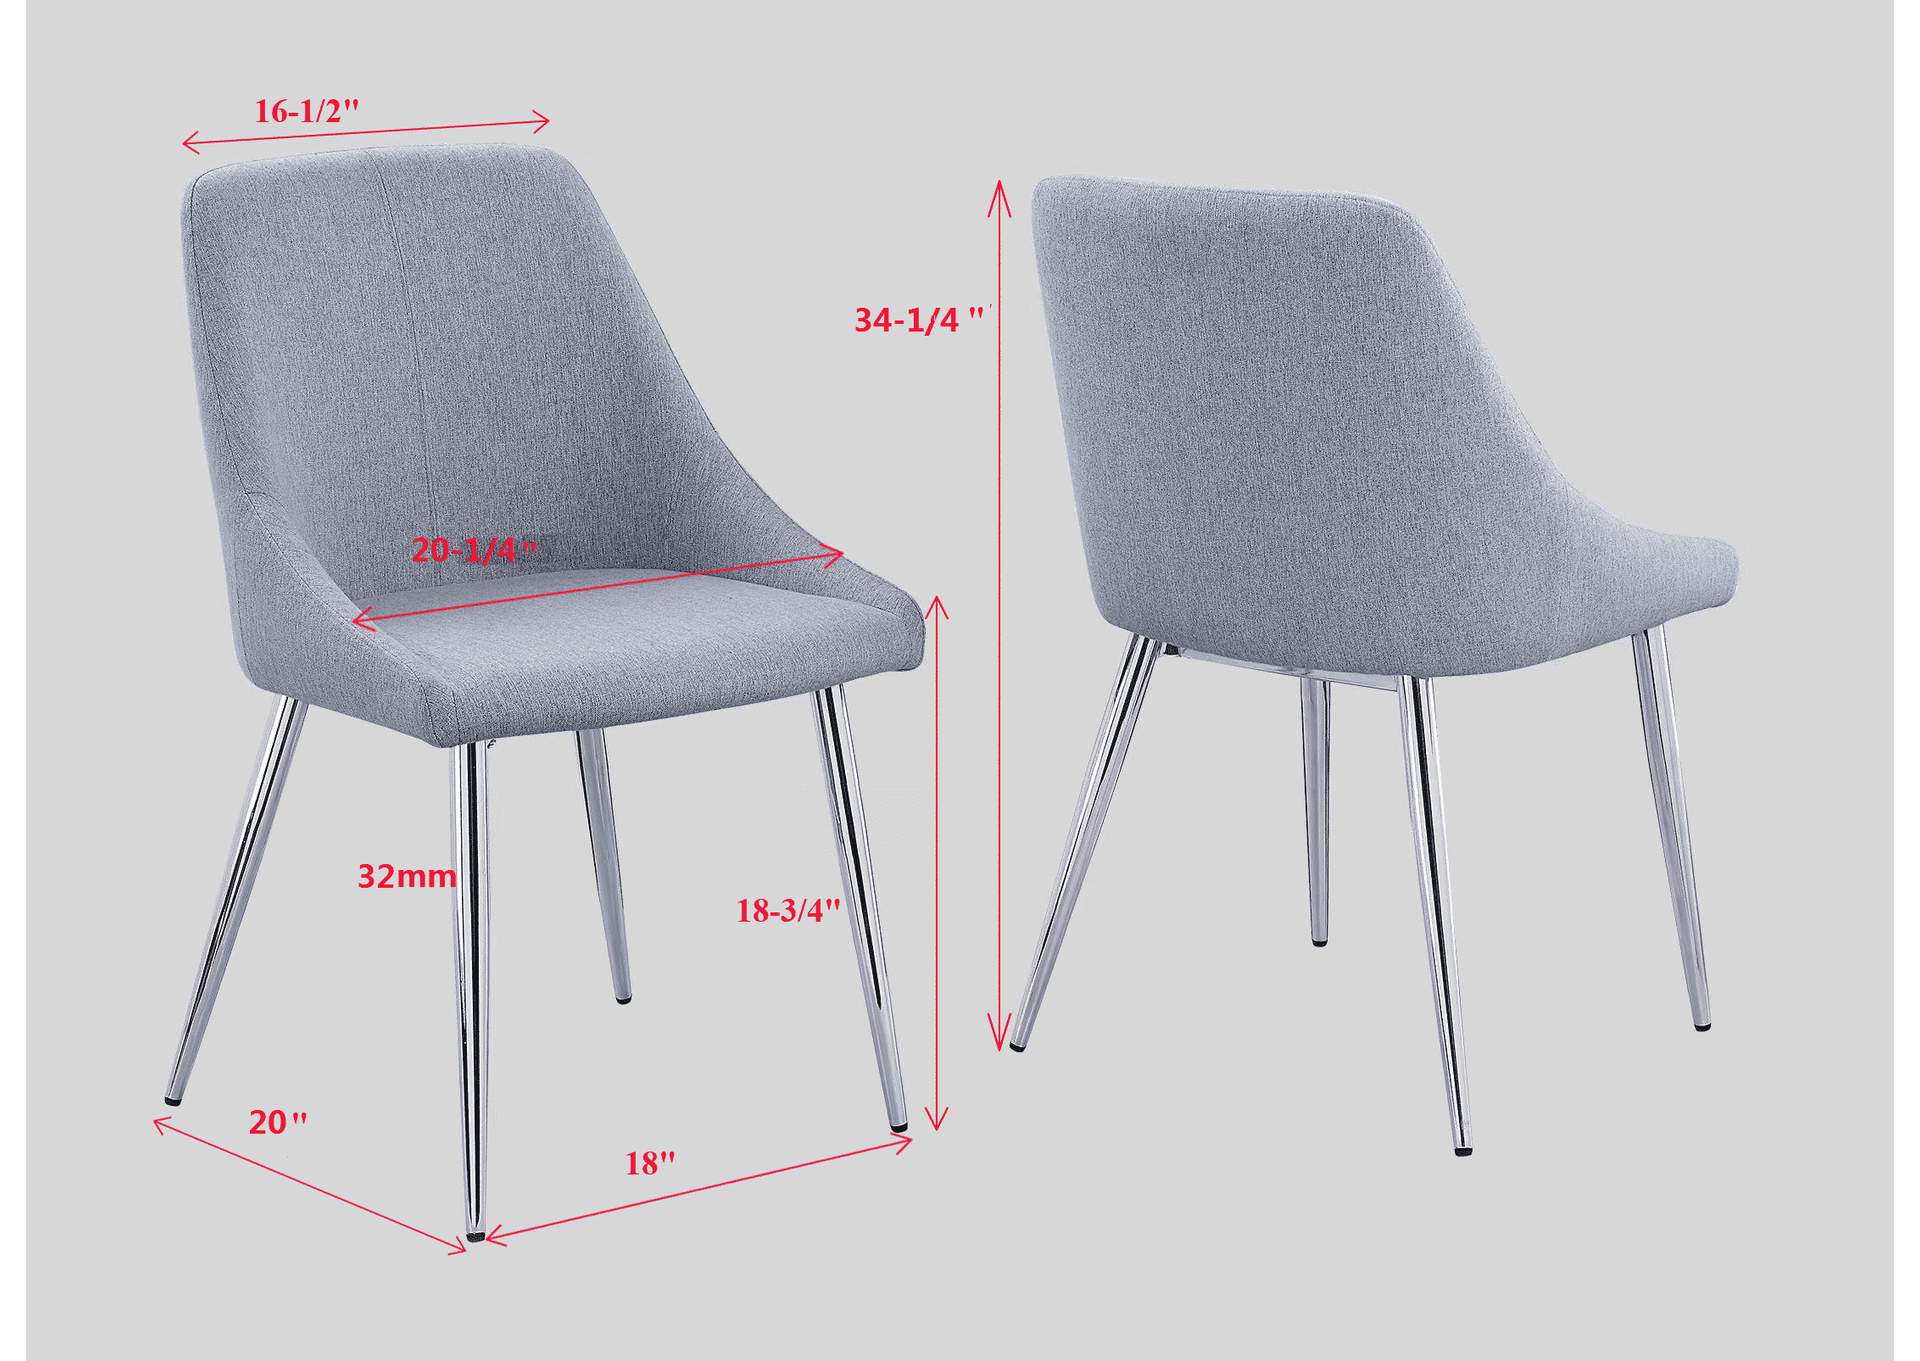 Tola Dining Chair,Crown Mark